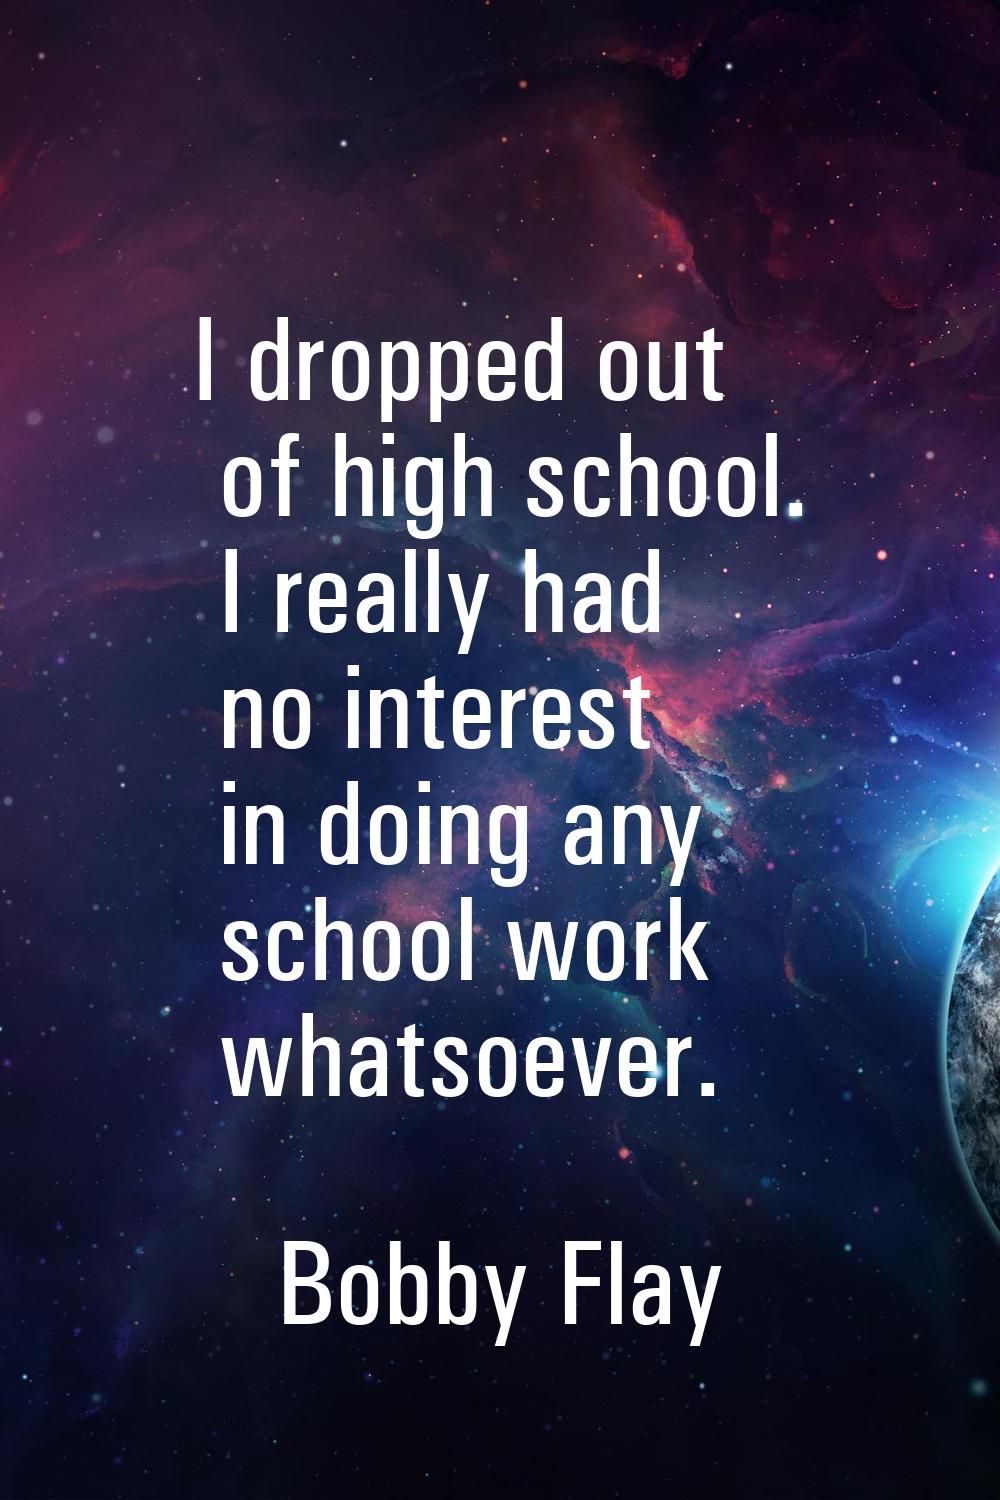 I dropped out of high school. I really had no interest in doing any school work whatsoever.